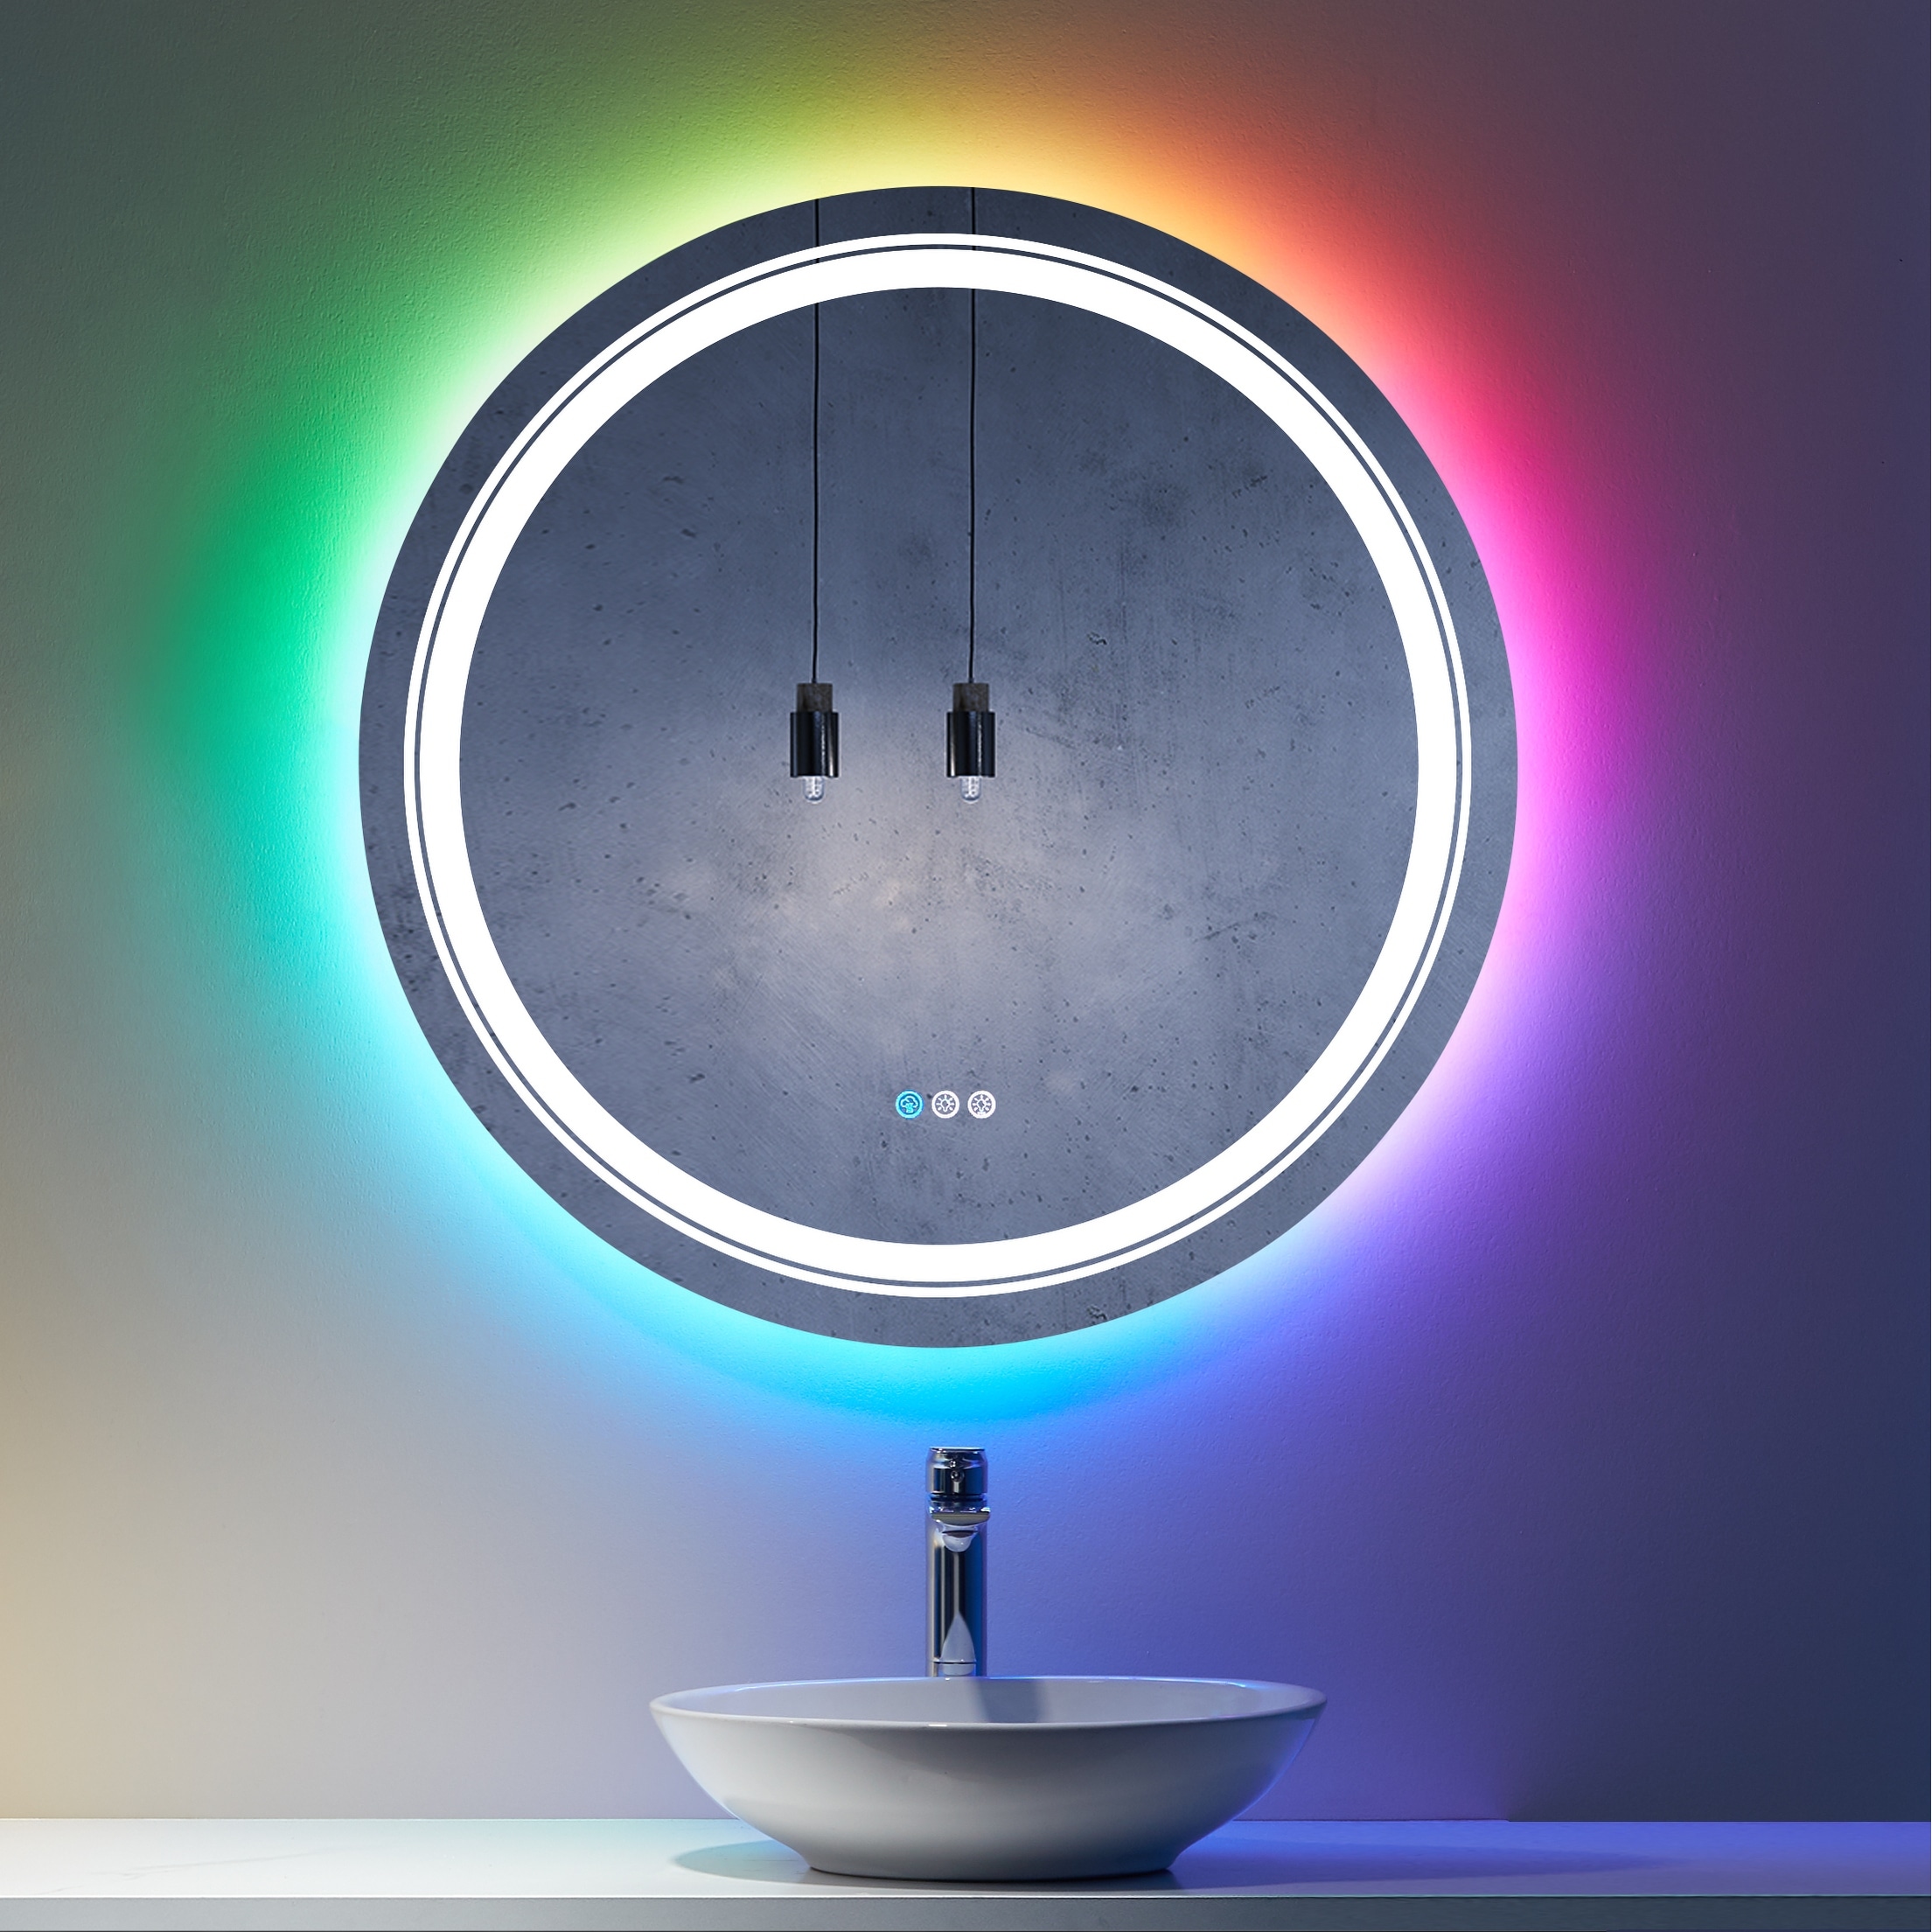 Toolkiss Round Frameless Anti Fog Bathroom Vanity Mirror in RGB Backlit and  Front Lighted On Sale Bed Bath  Beyond 36179349